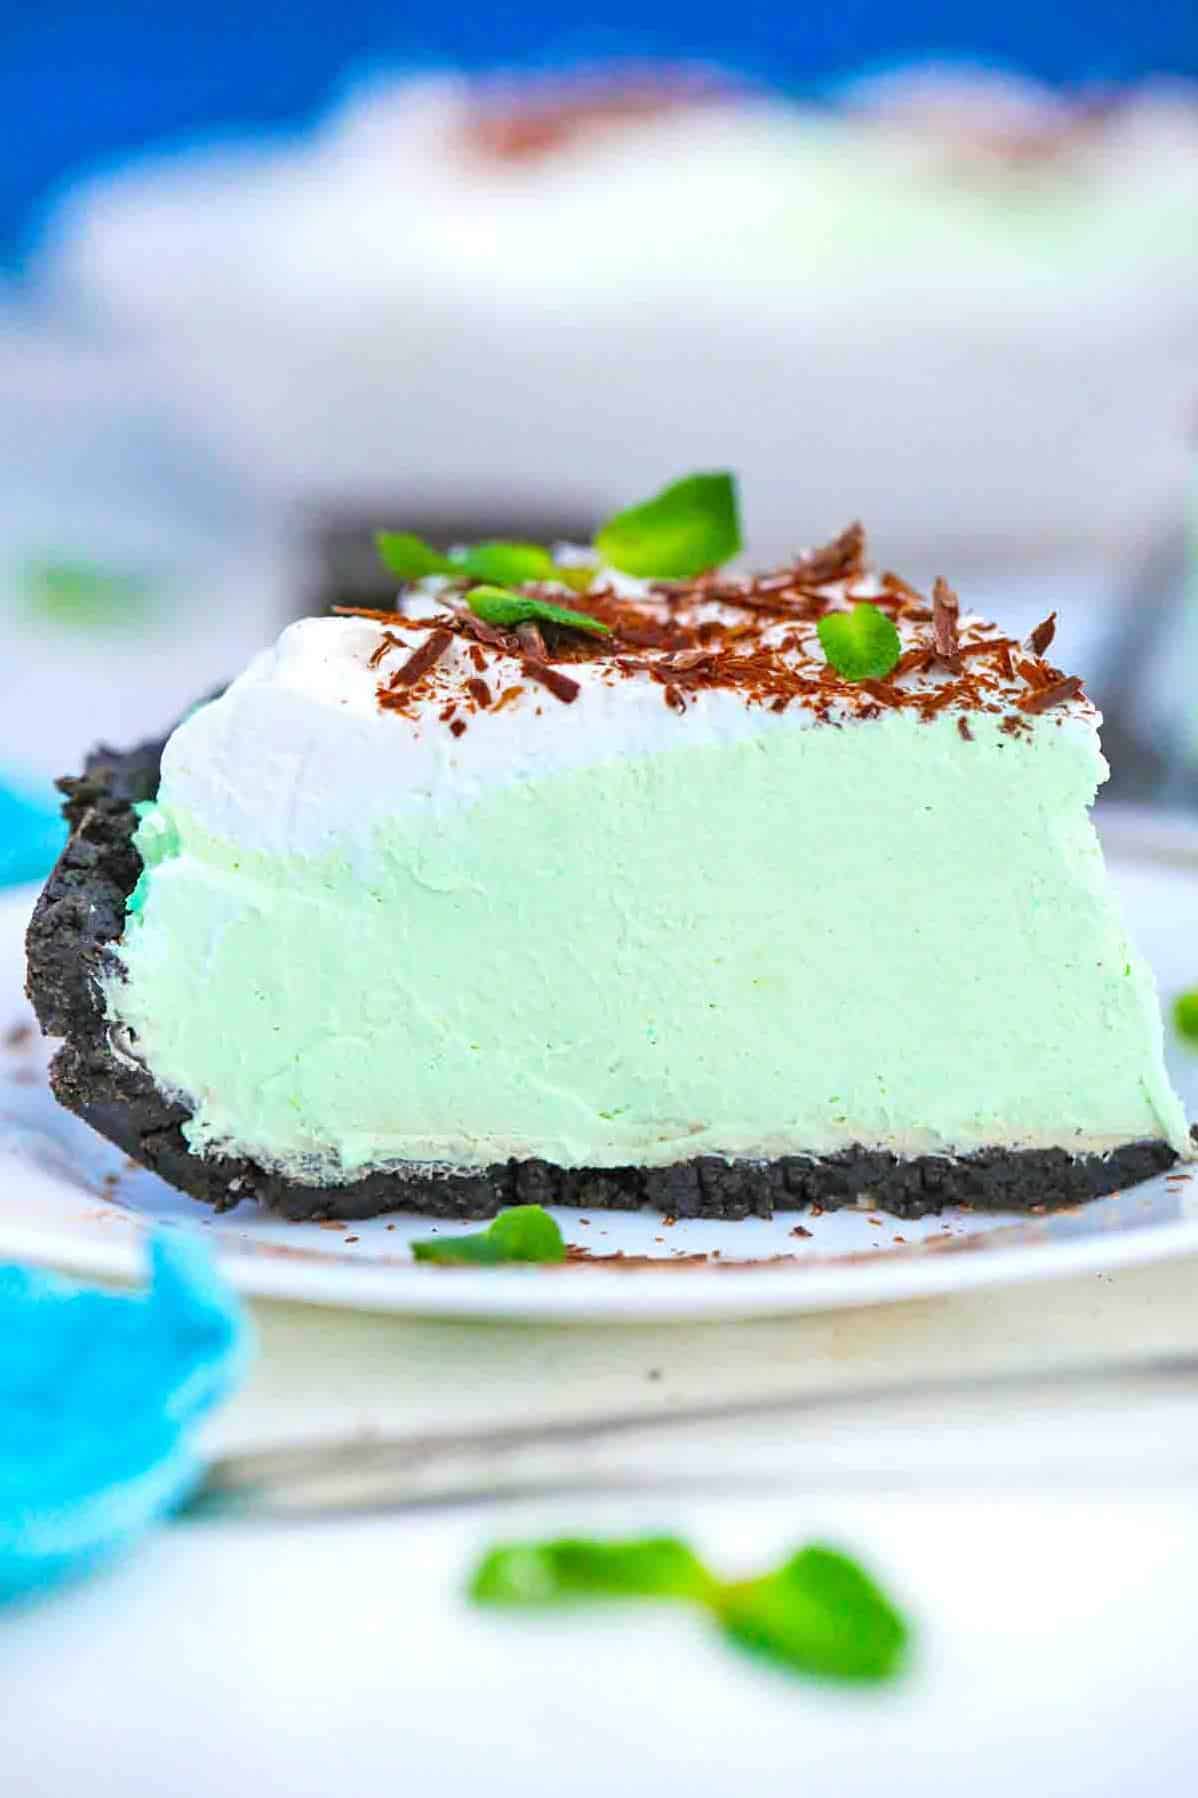  Cool off with this minty delight